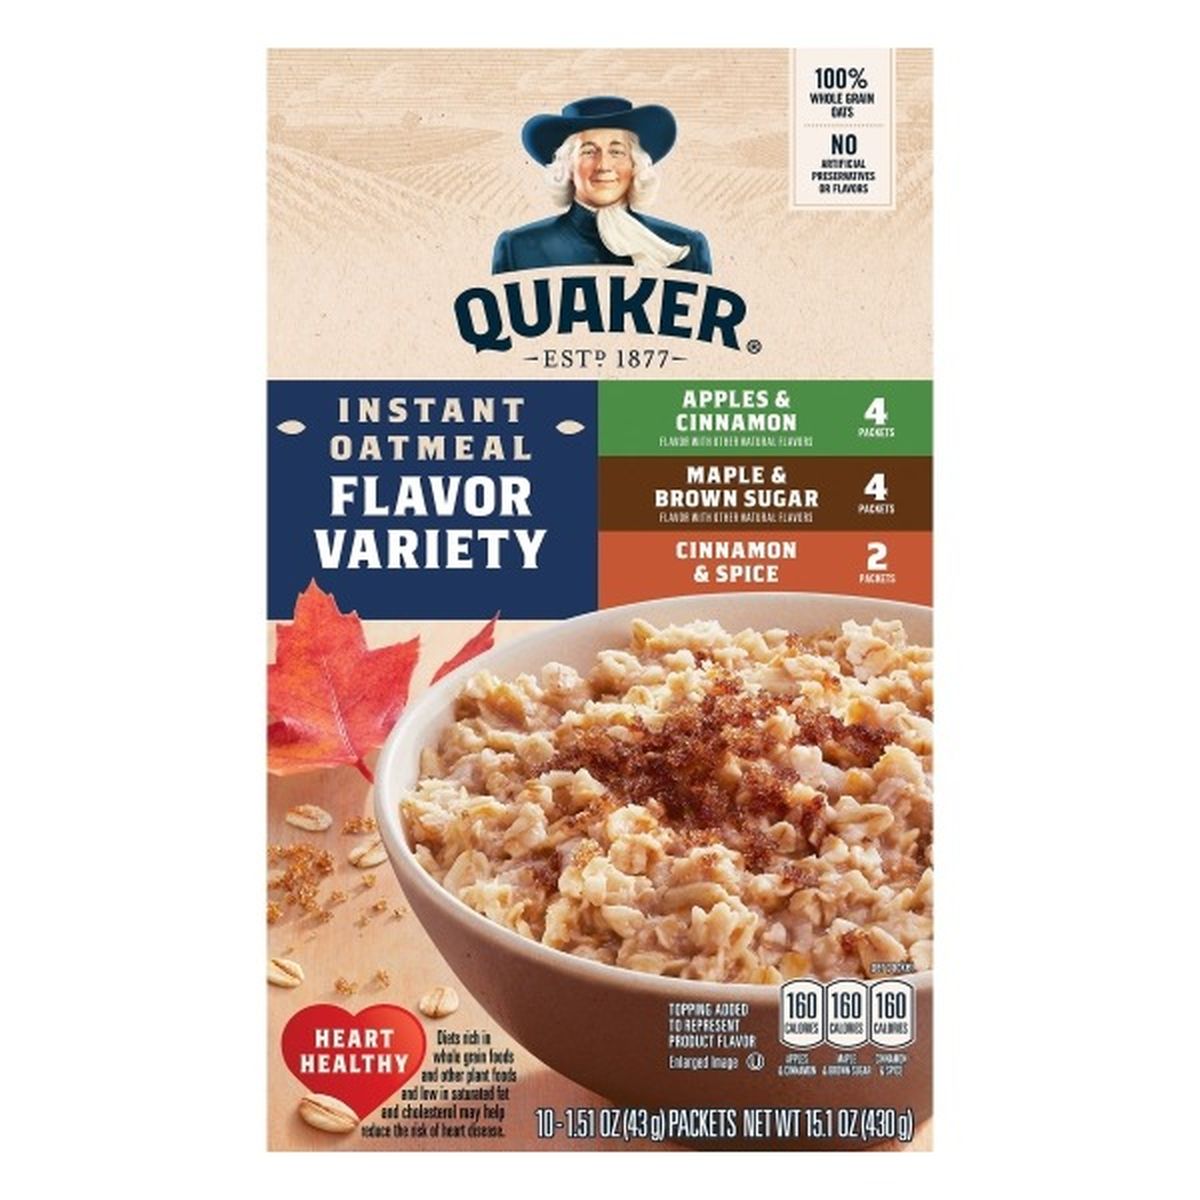 Calories in Quaker Instant Oatmeal, Flavor Variety